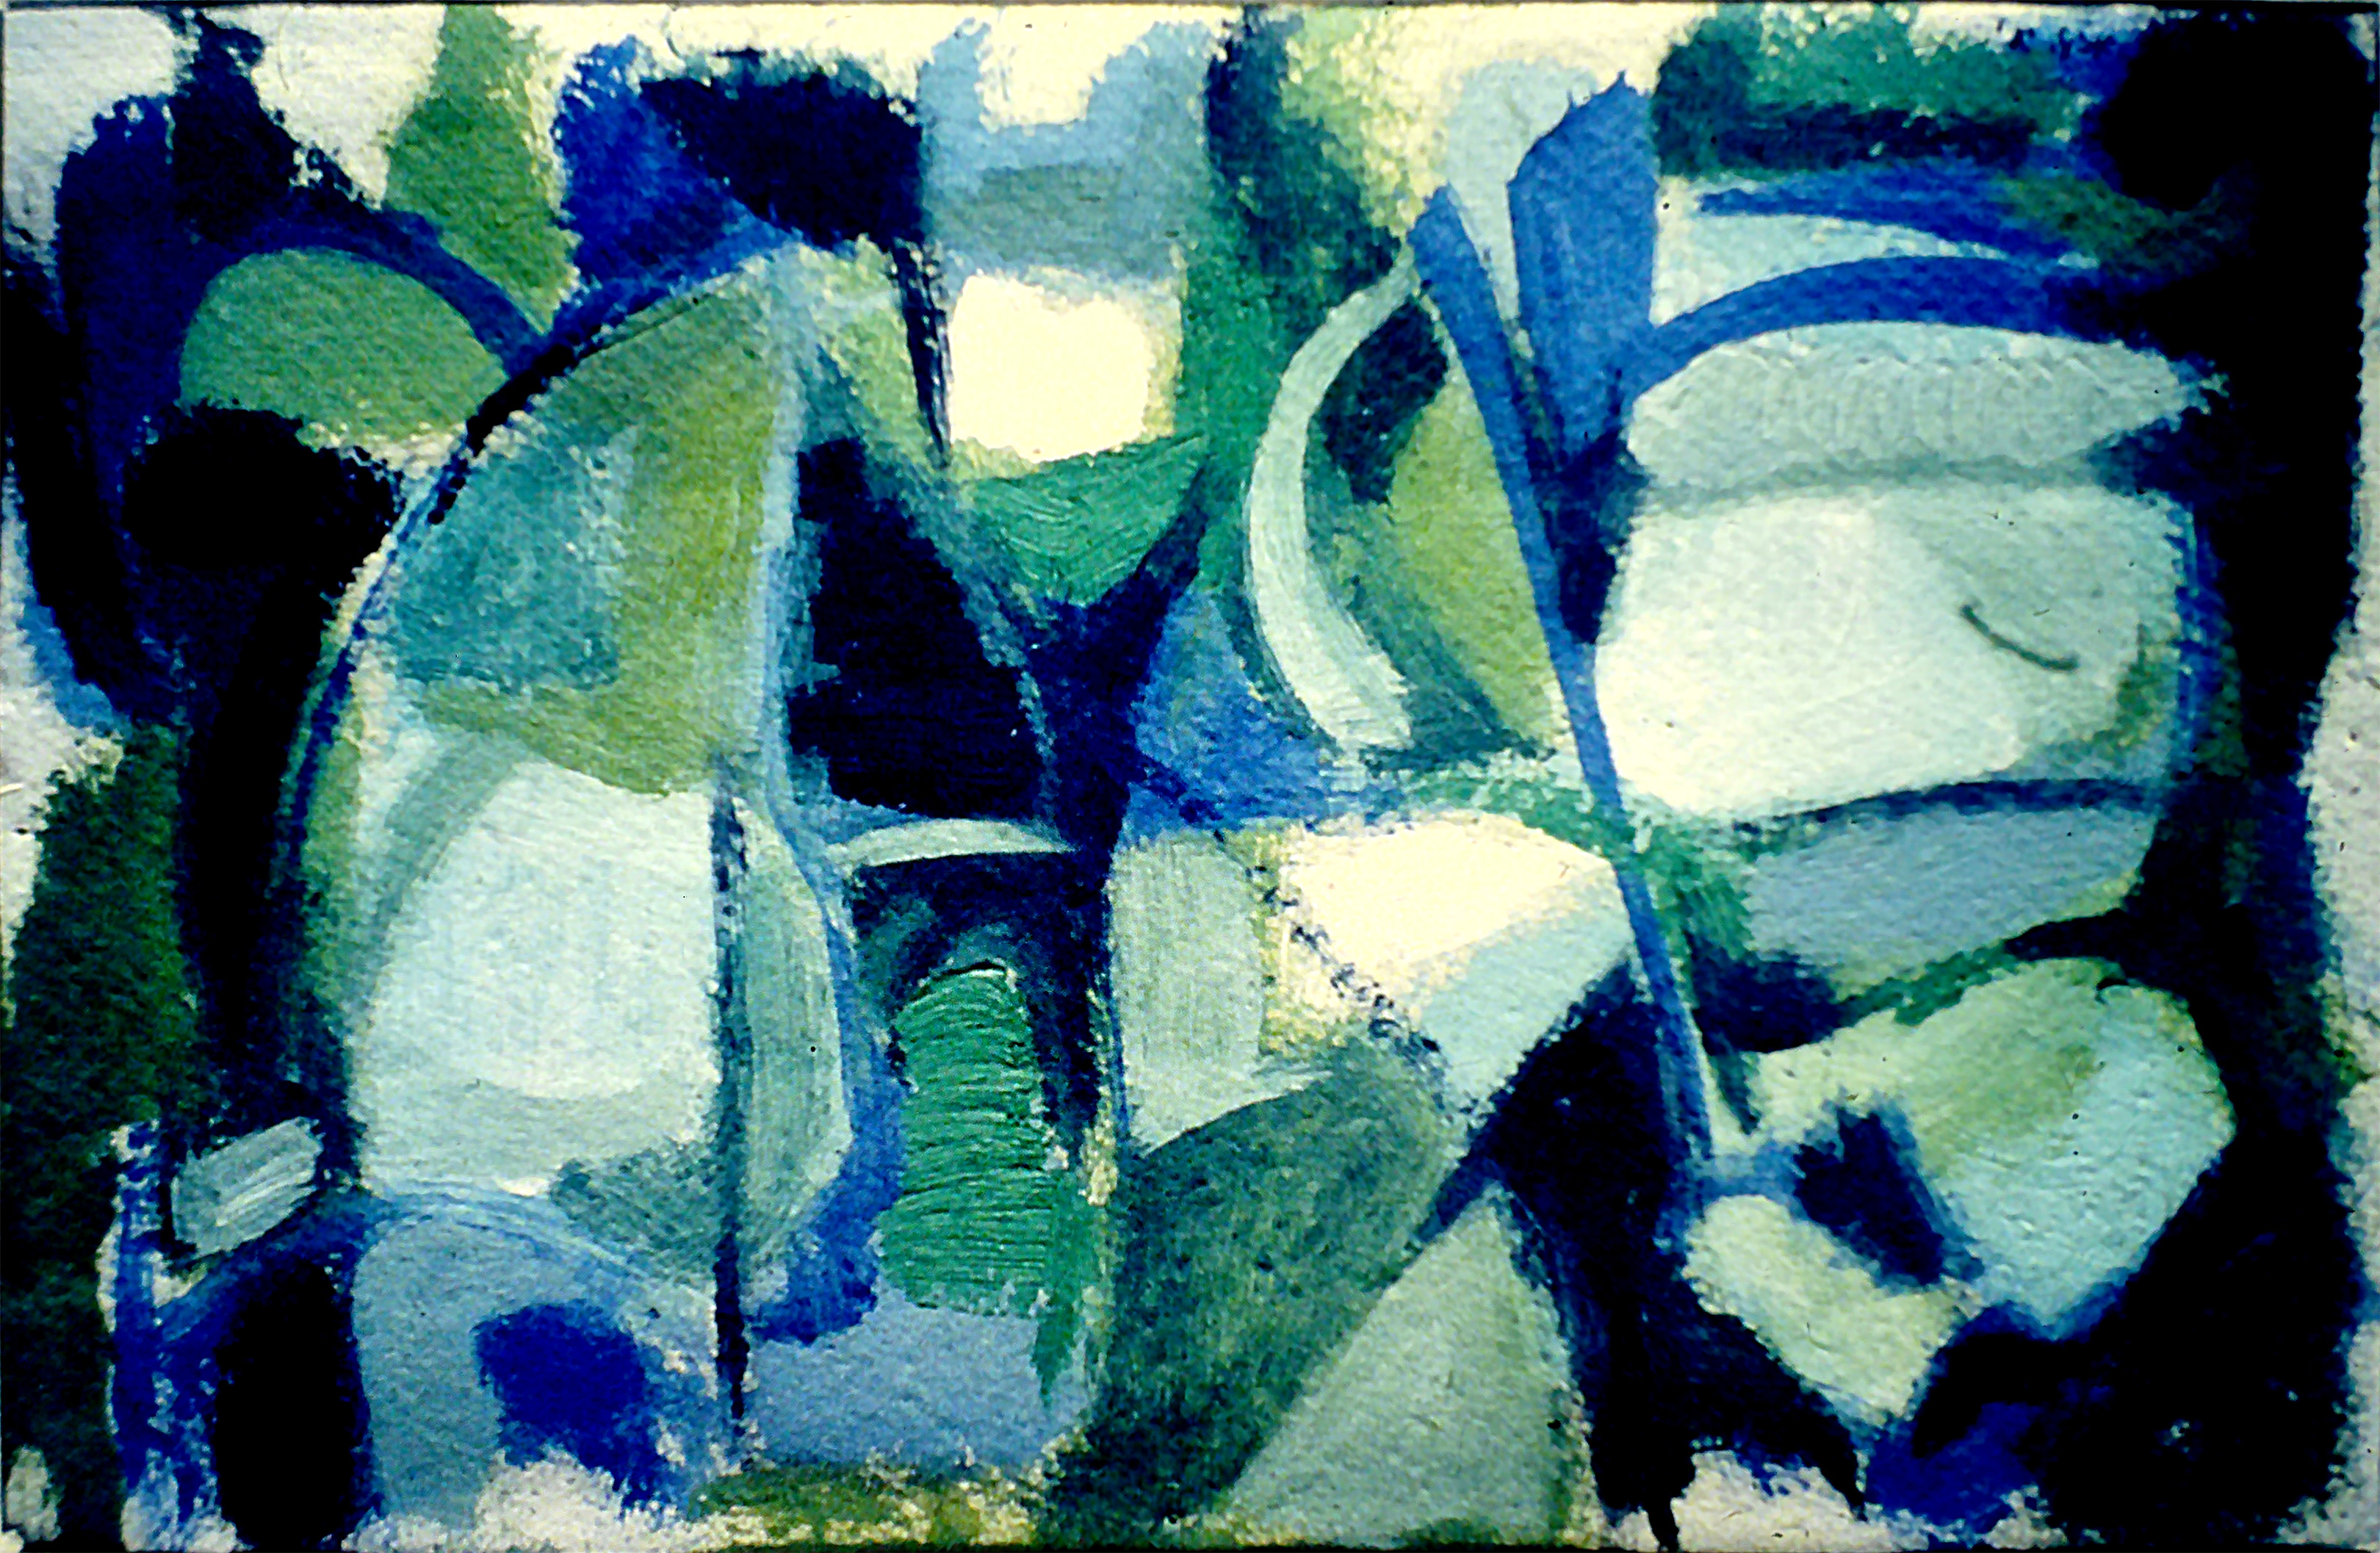 An abstract composition featuring prominent shades of blue, where thick blocks are stacked on top of each other, gently interacting.